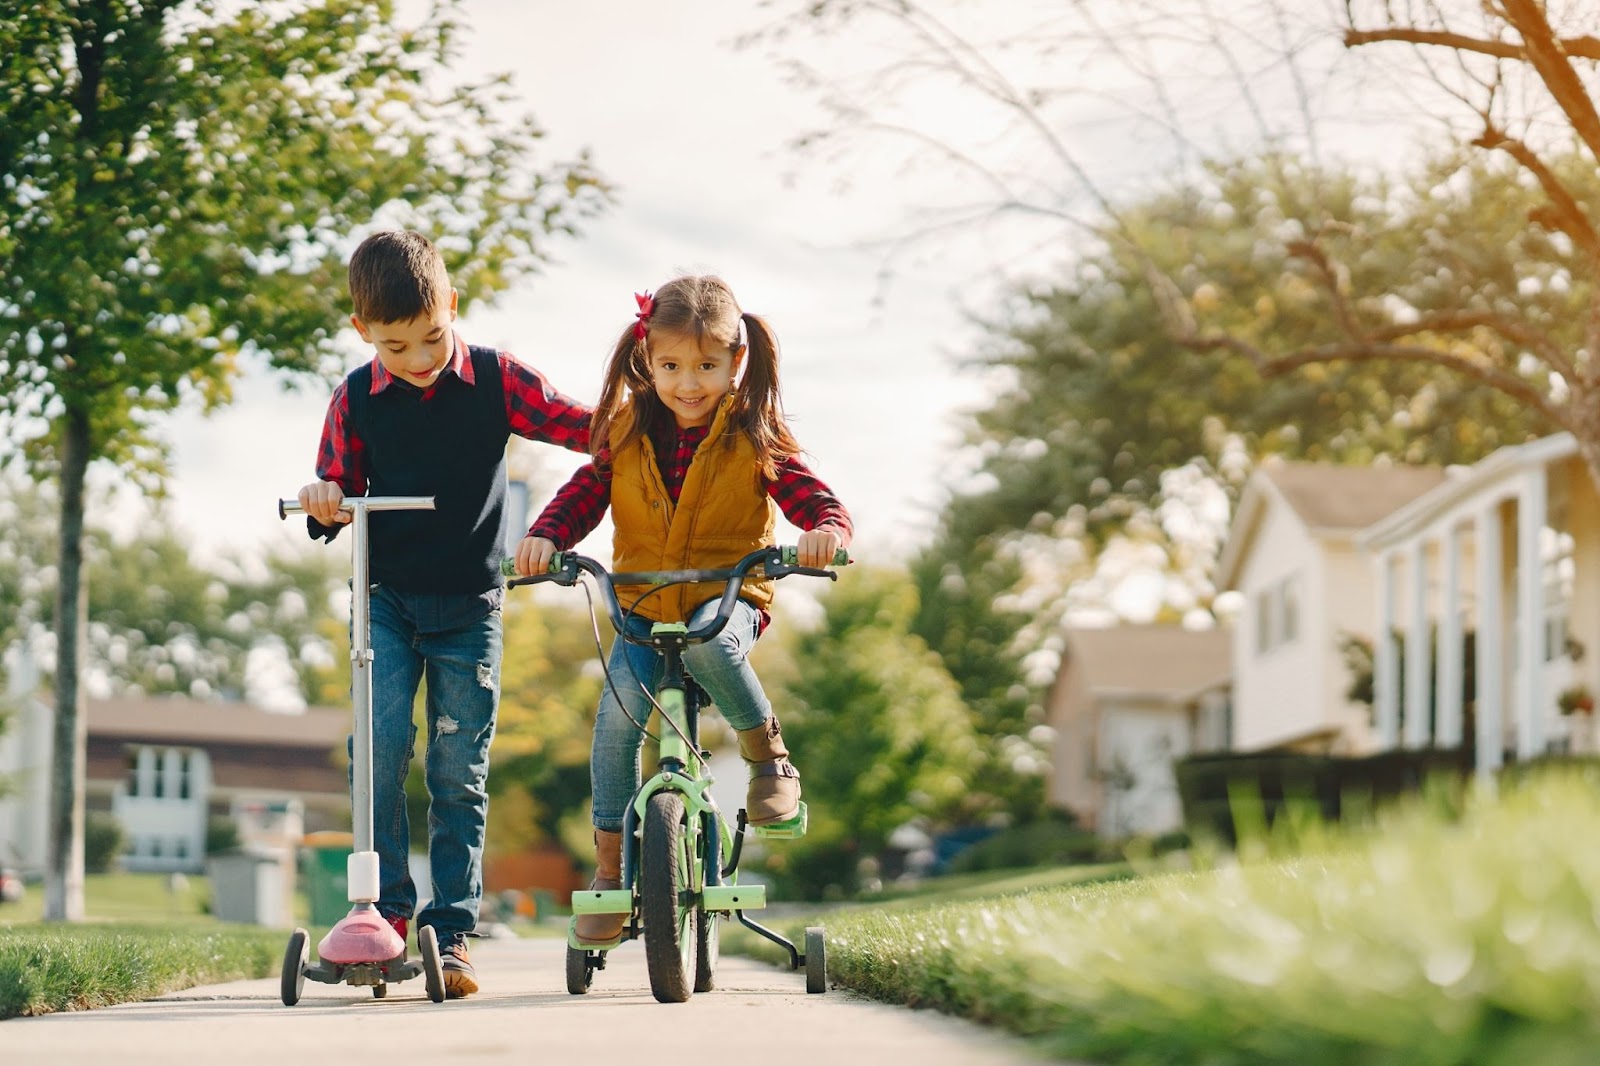 A boy and a girl riding a scooter and a bicycle respectively in a suburban environment